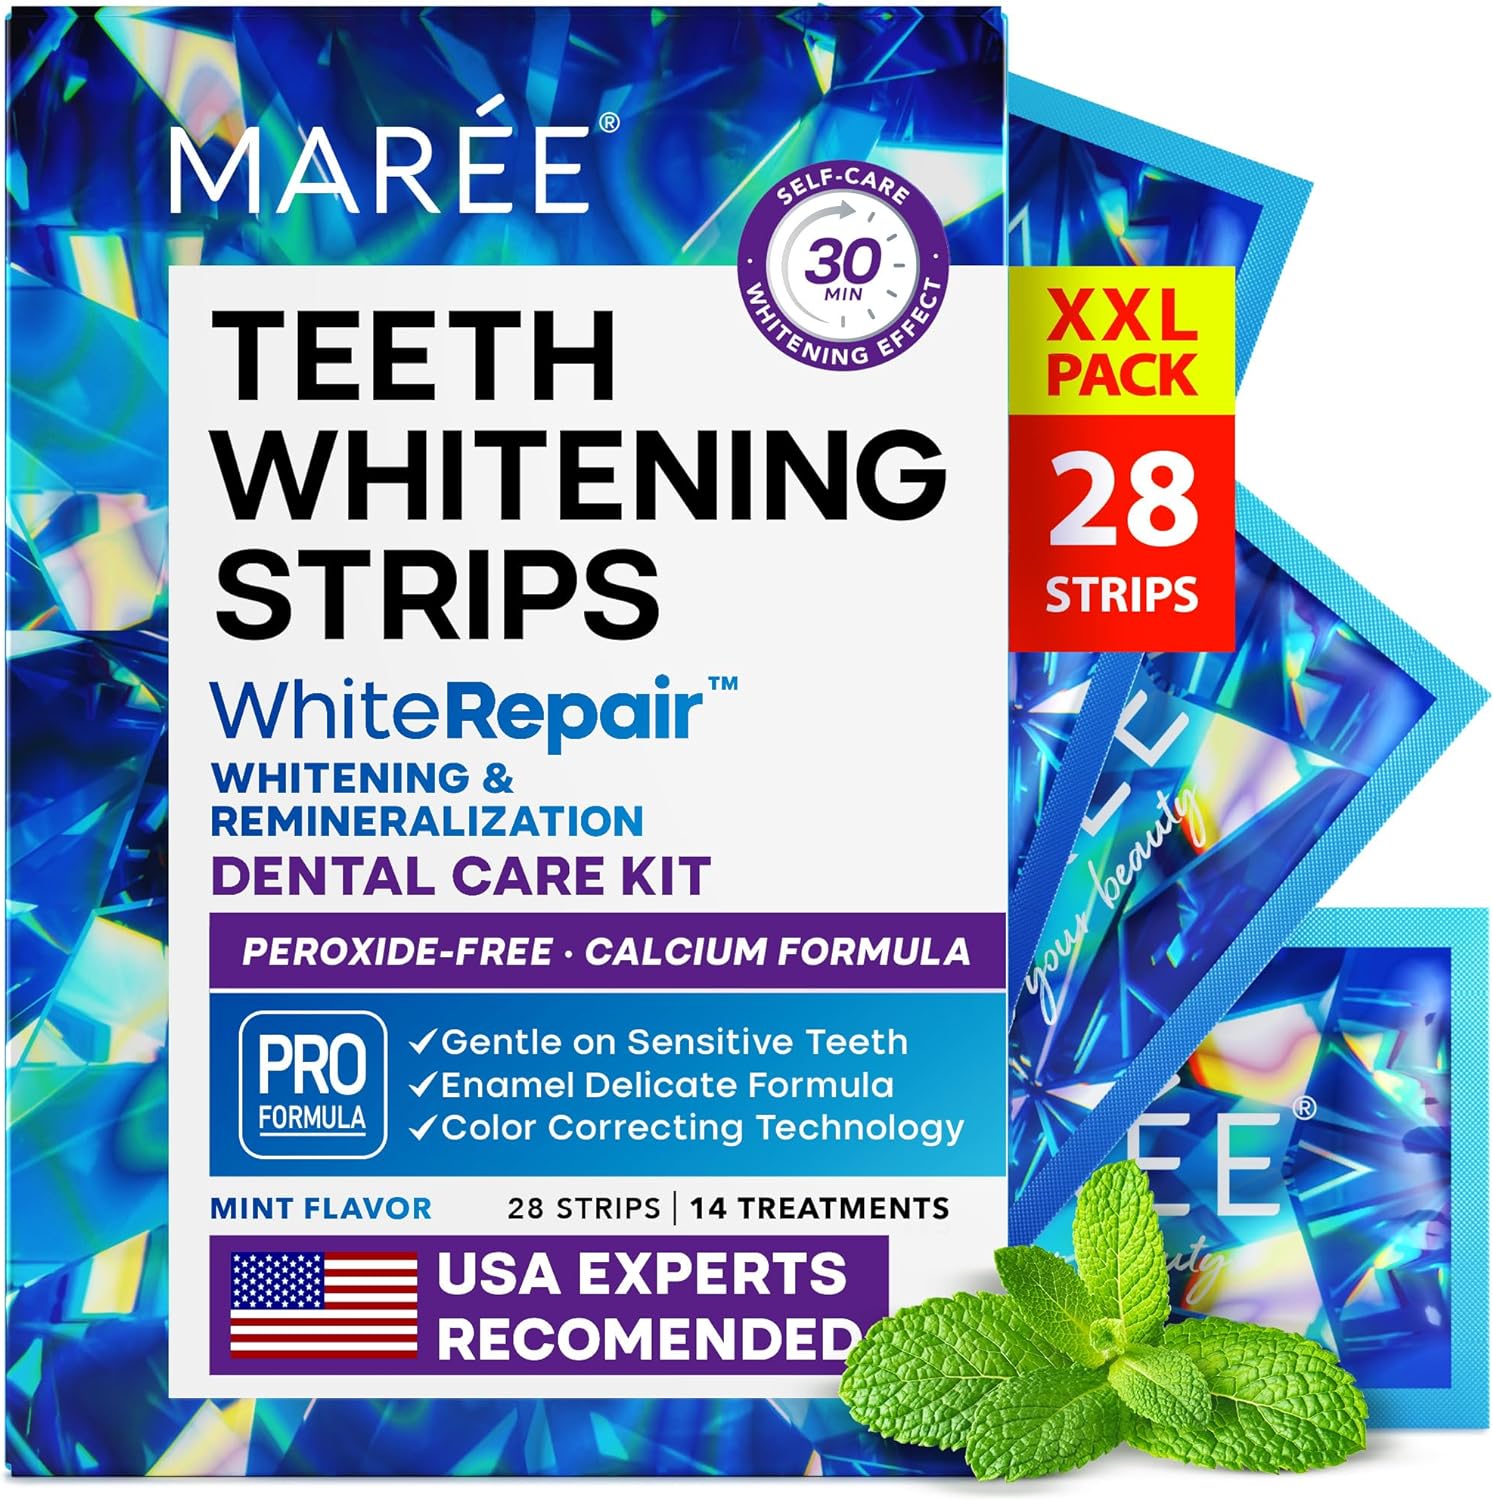 MAREE Dental Care Kit with Mint Flavor Comfortable for Sensitive Teeth - Teeth Whitening Strips with Calcium Formula -White Strips for Gentle Dental Care & Fresh Breath - Pack of 28 Strips